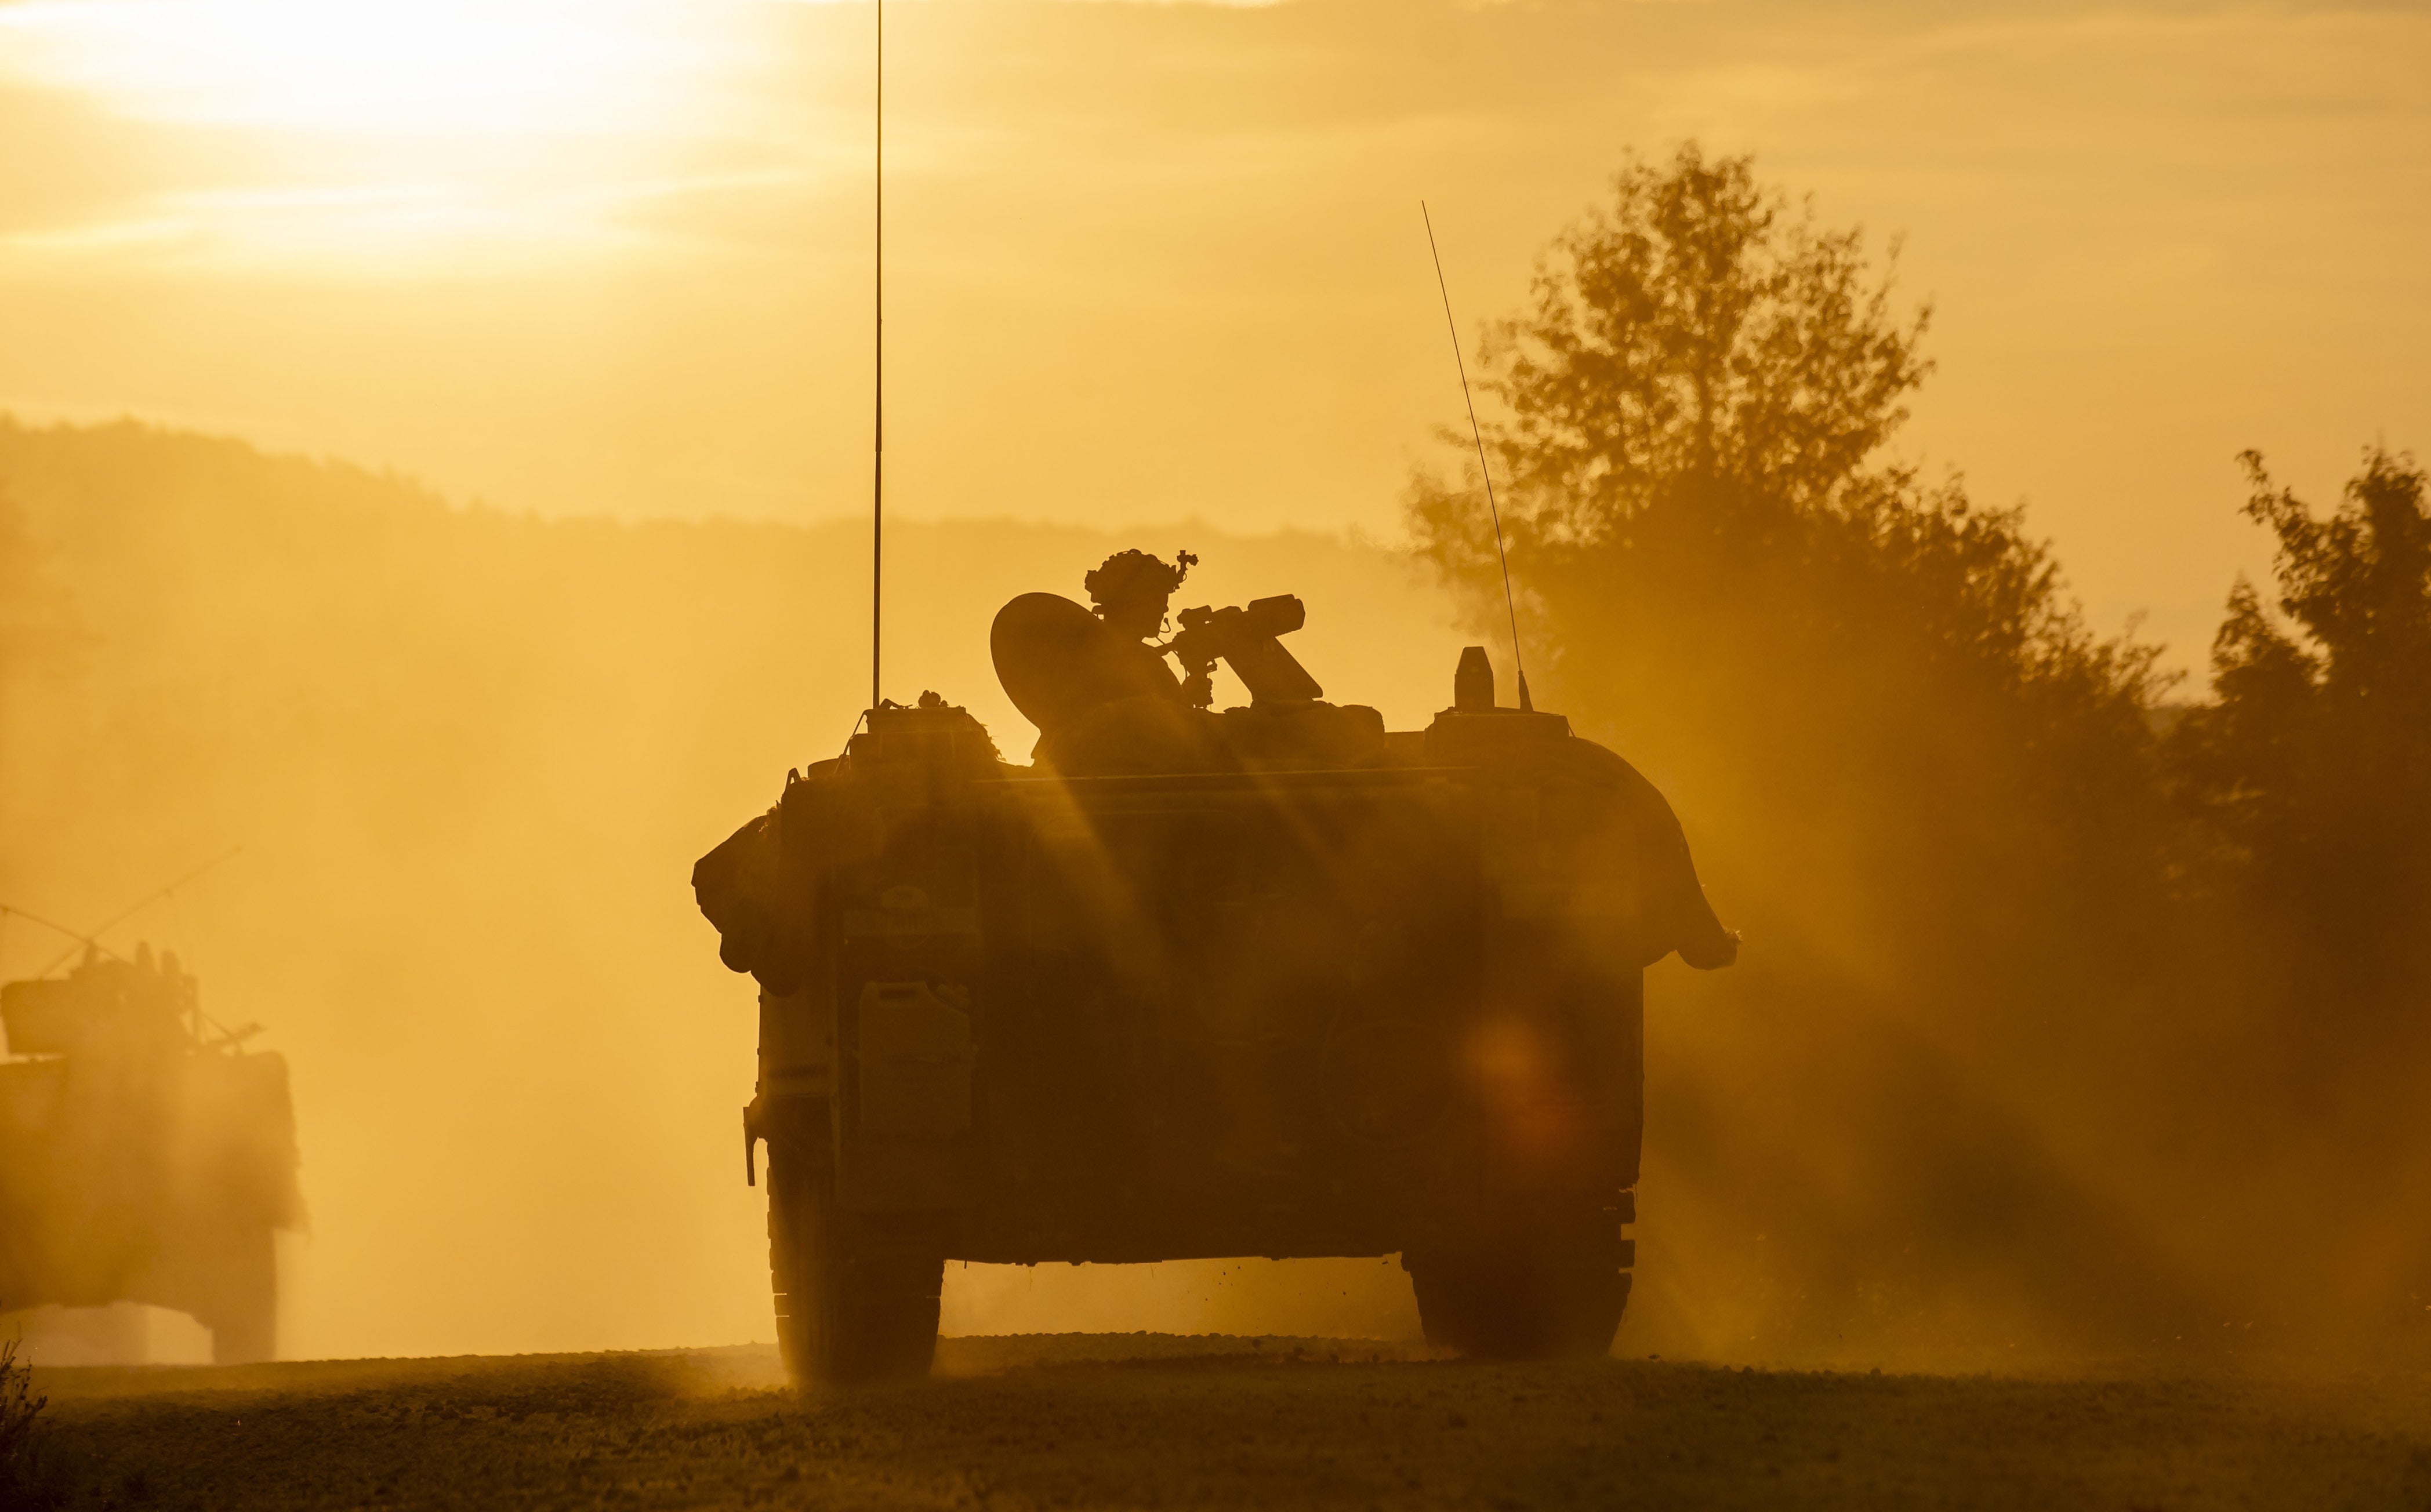 Troops ride a vehicle at dusk